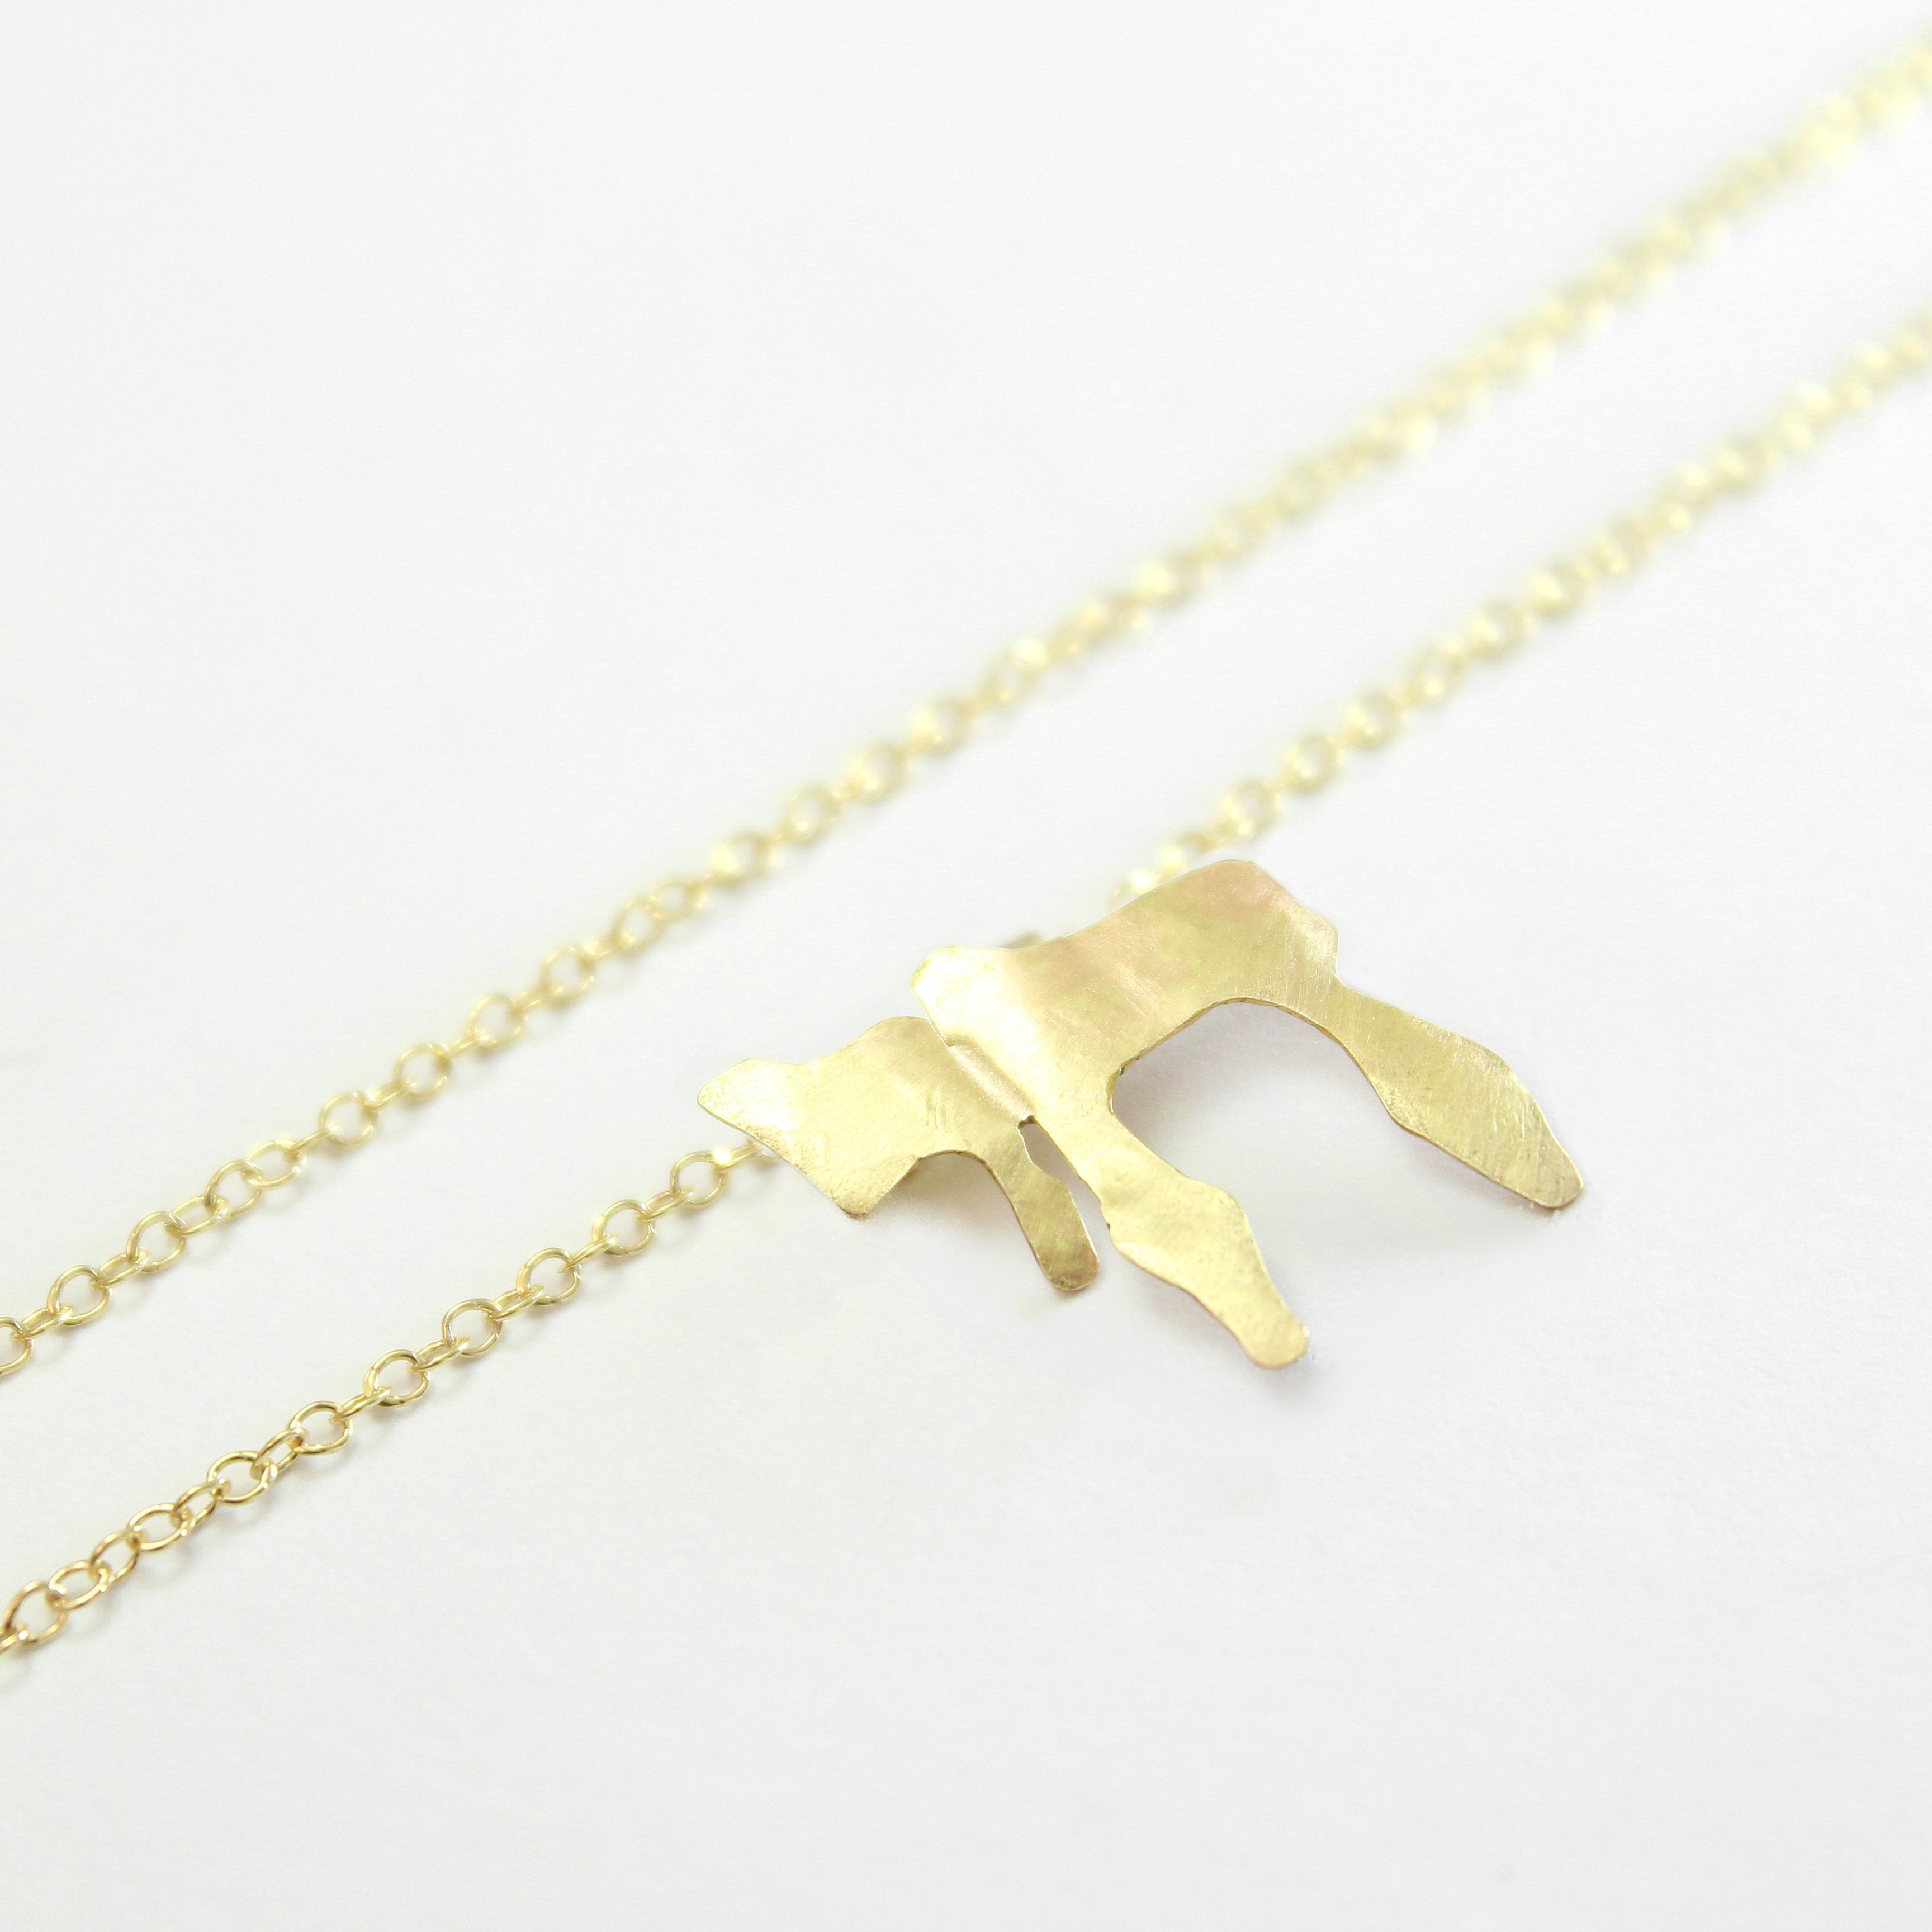 Chai Gold filled Necklace - Shulamit Kanter